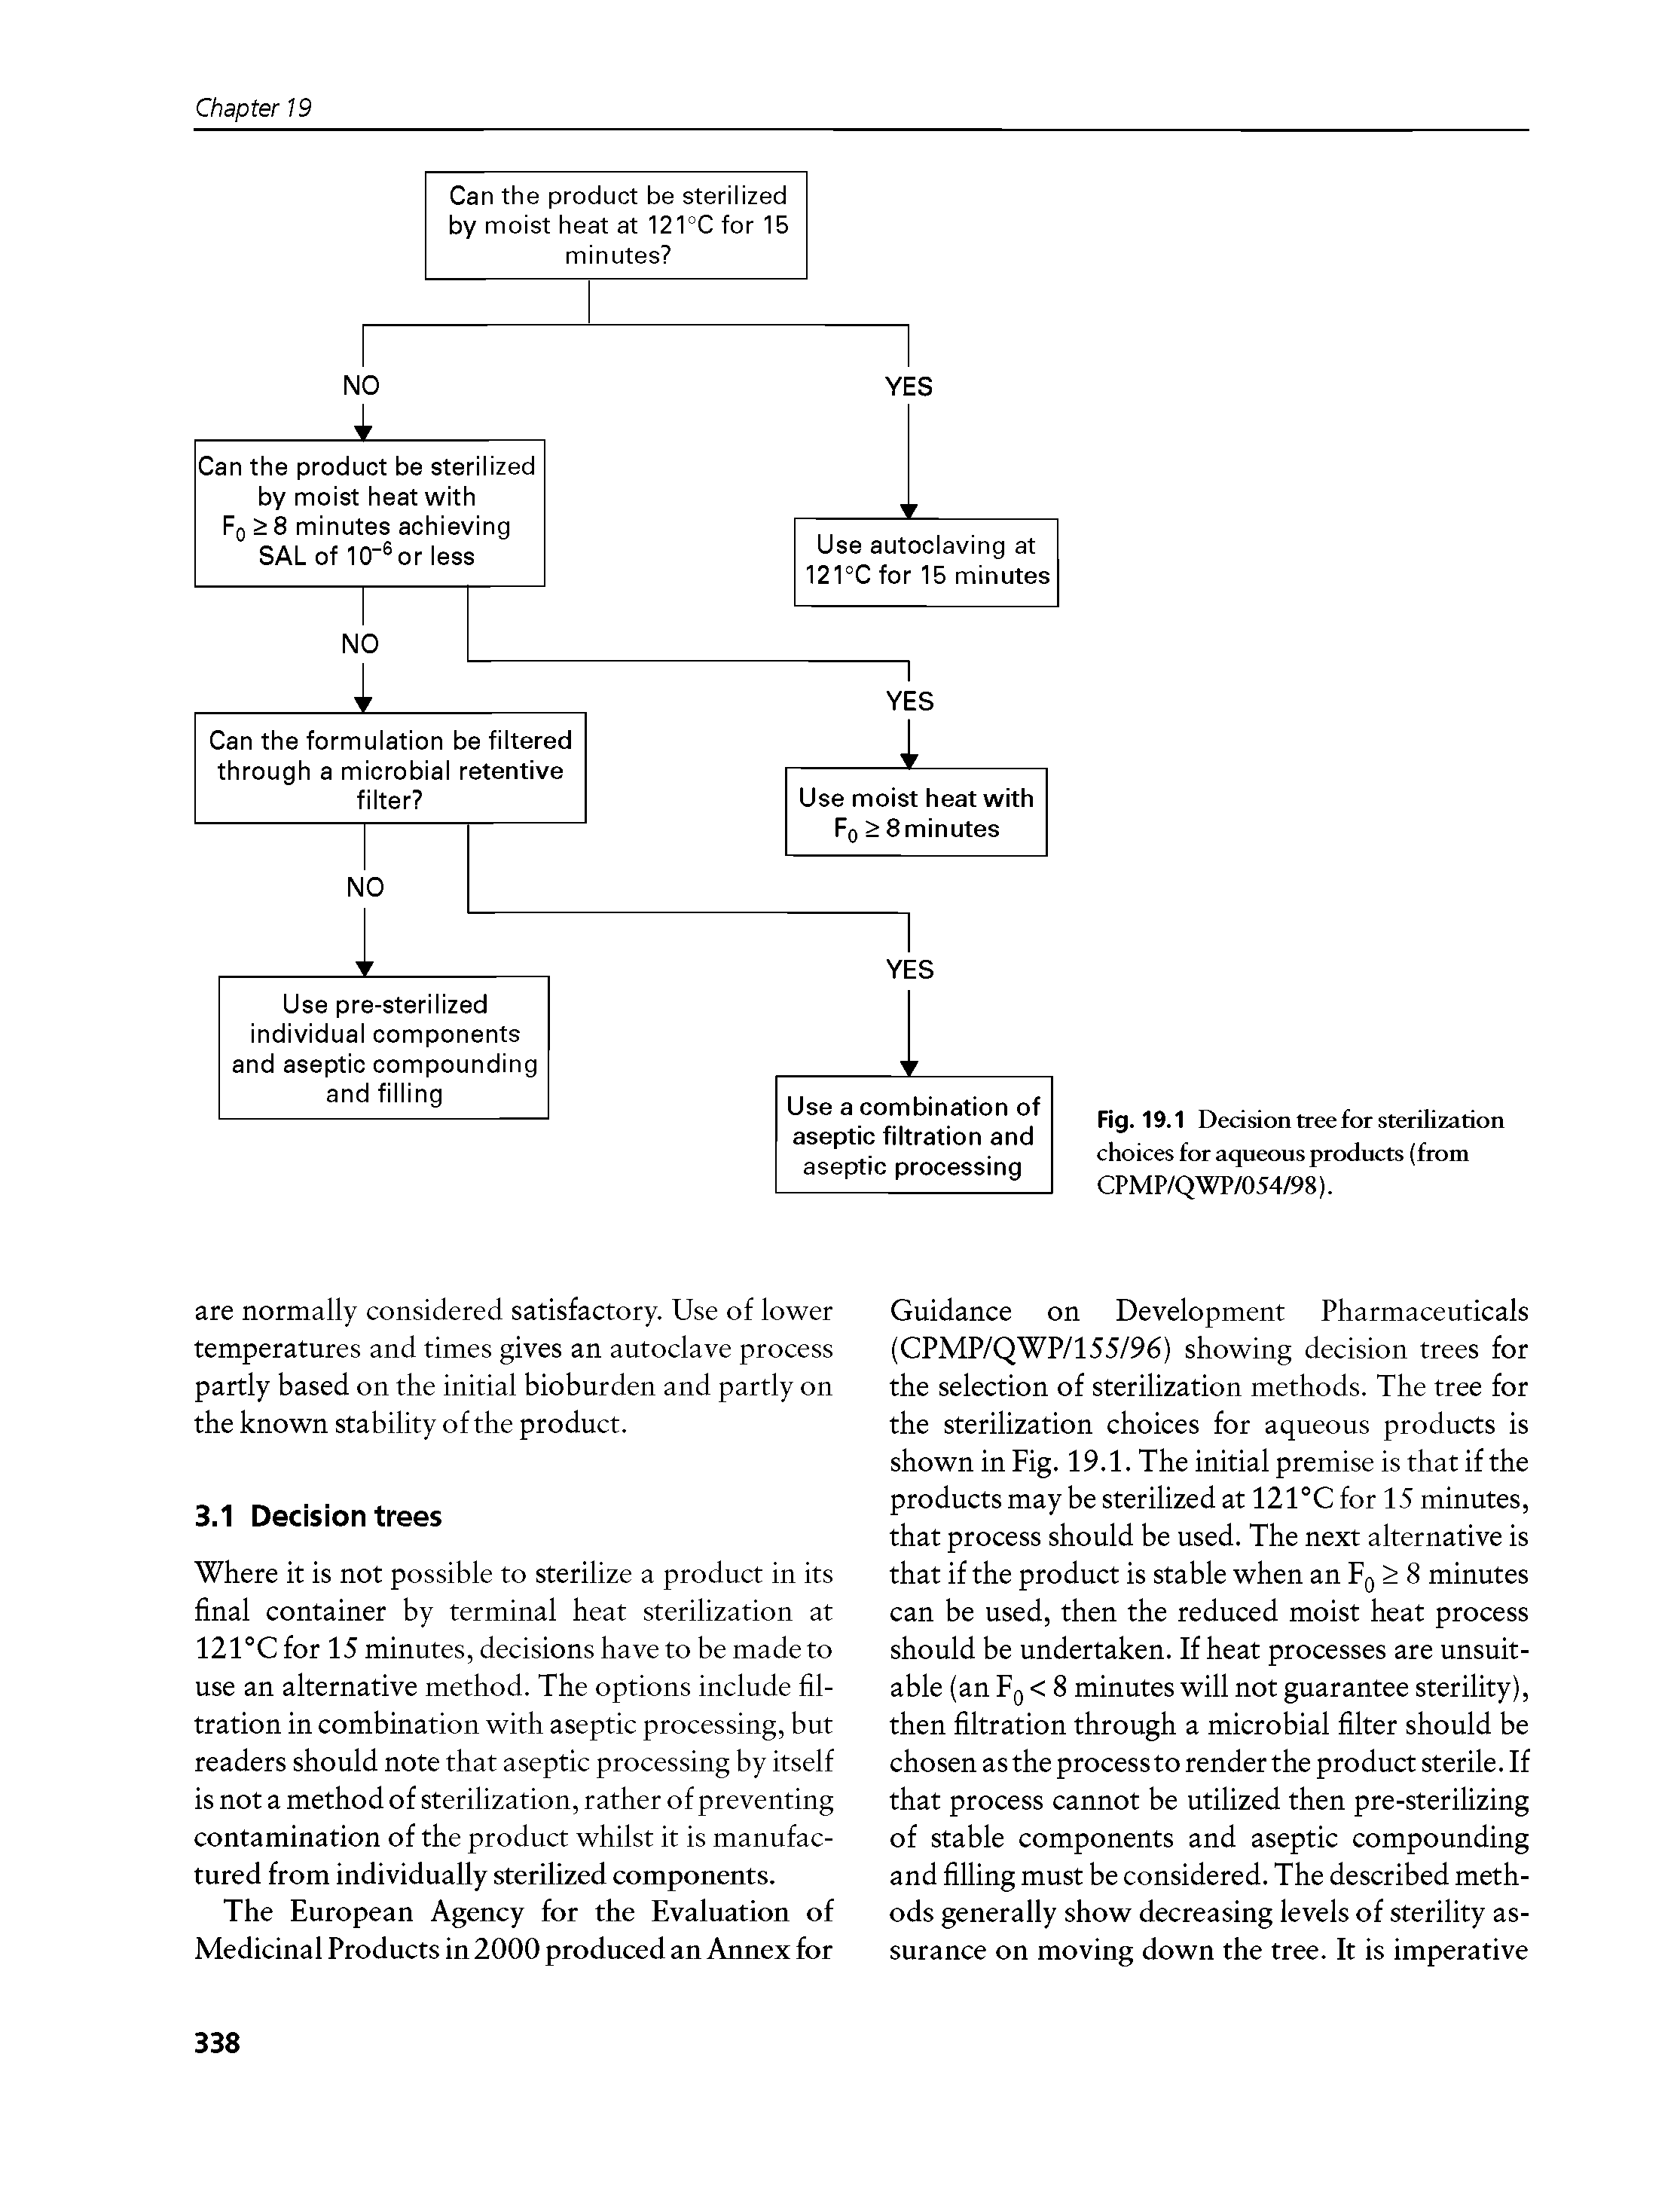 Fig. 19.1 Decision tree for sterilization choices for aqueous products (from CPMP/QWP/054/98).